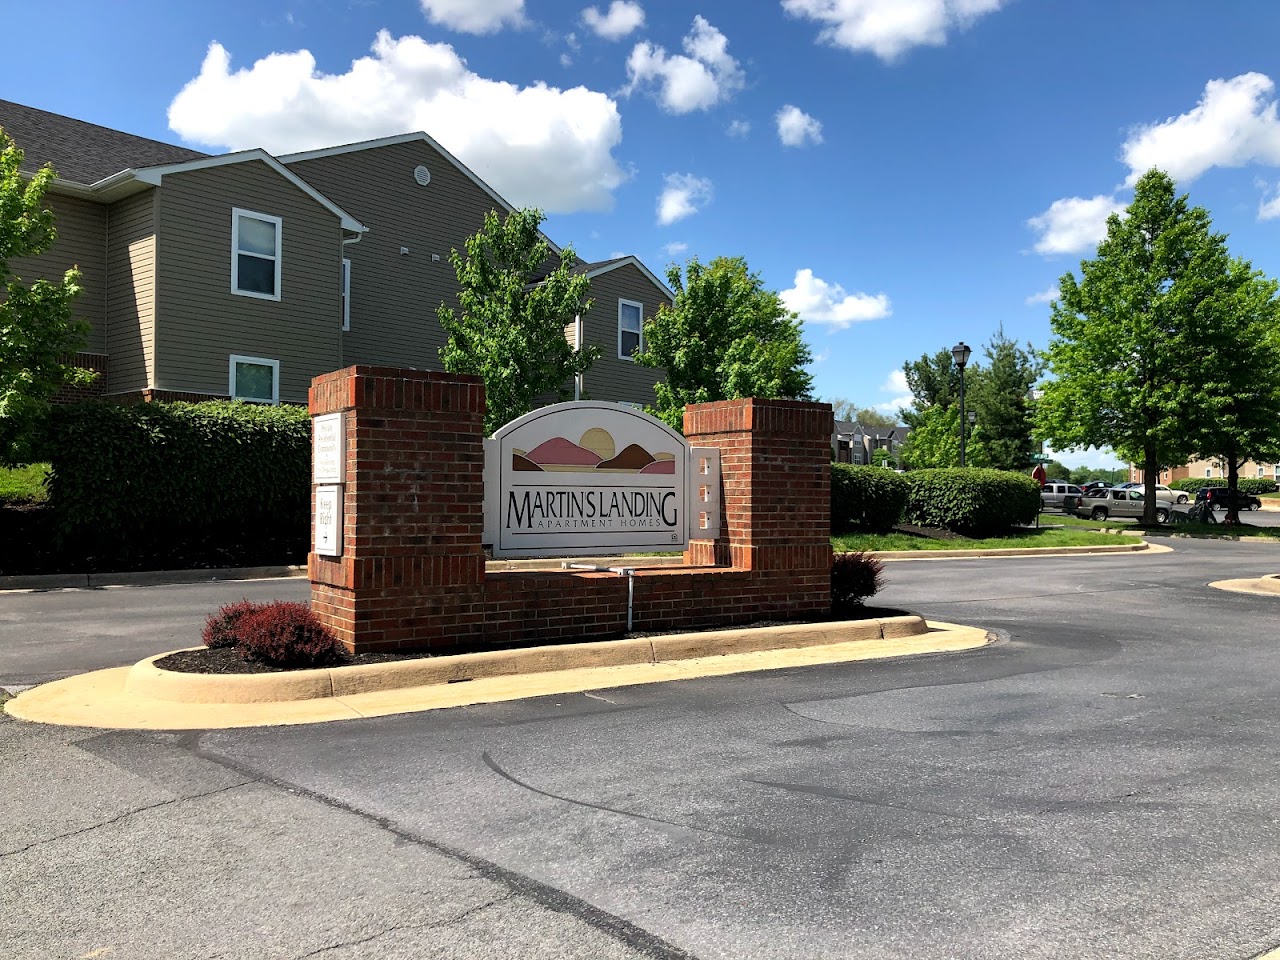 Photo of MARTIN'S LANDING APARTMENT HOMES AND TIMBERLEAF ESTATES. Affordable housing located at 2100 MARTIN'S LANDING CIRCLE MARTINSBURG, WV 25401